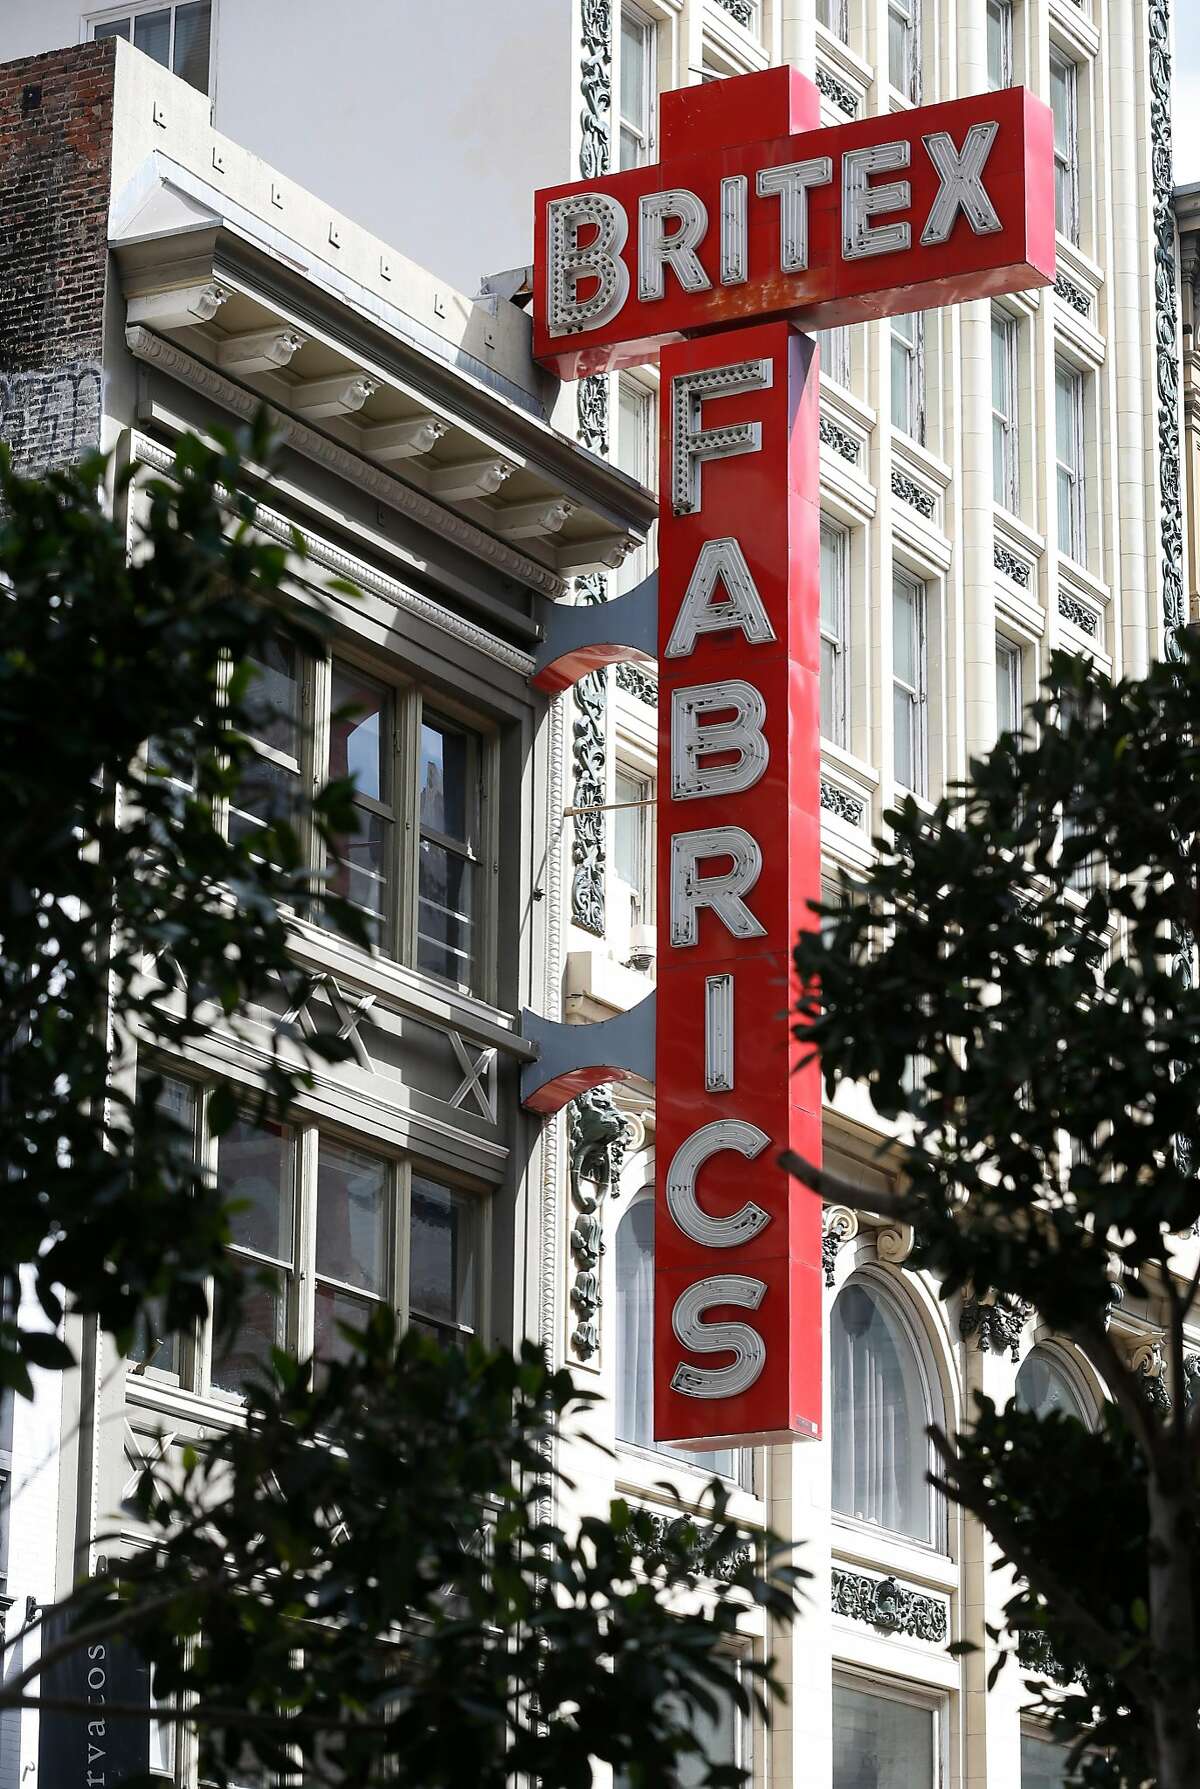 A building which housed Britex Fabrics (left) is being converted to office space in San Francisco, Calif. on Tuesday, Sept. 18, 2018. Supervisor Aaron Peskin is planning to introduce legislation which would place limits on the amount of retail and commercial space that can be converted to office use in the Union Square area.